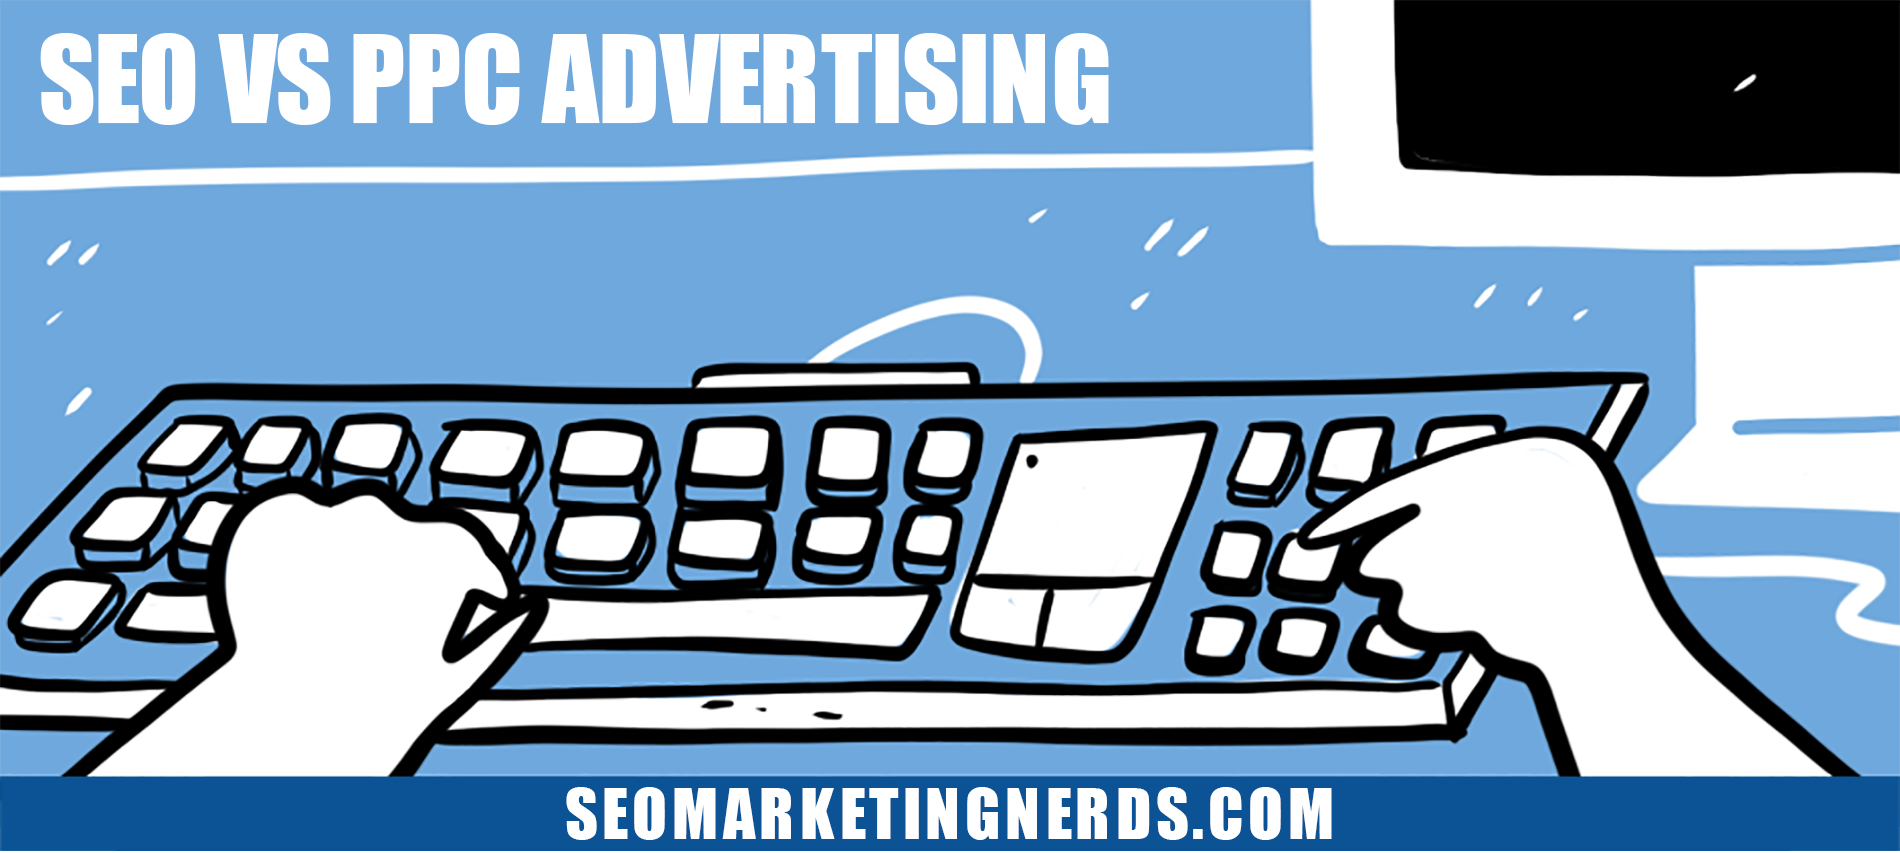 SEO vs PPC Advertising – Which One is Better for Your Business?